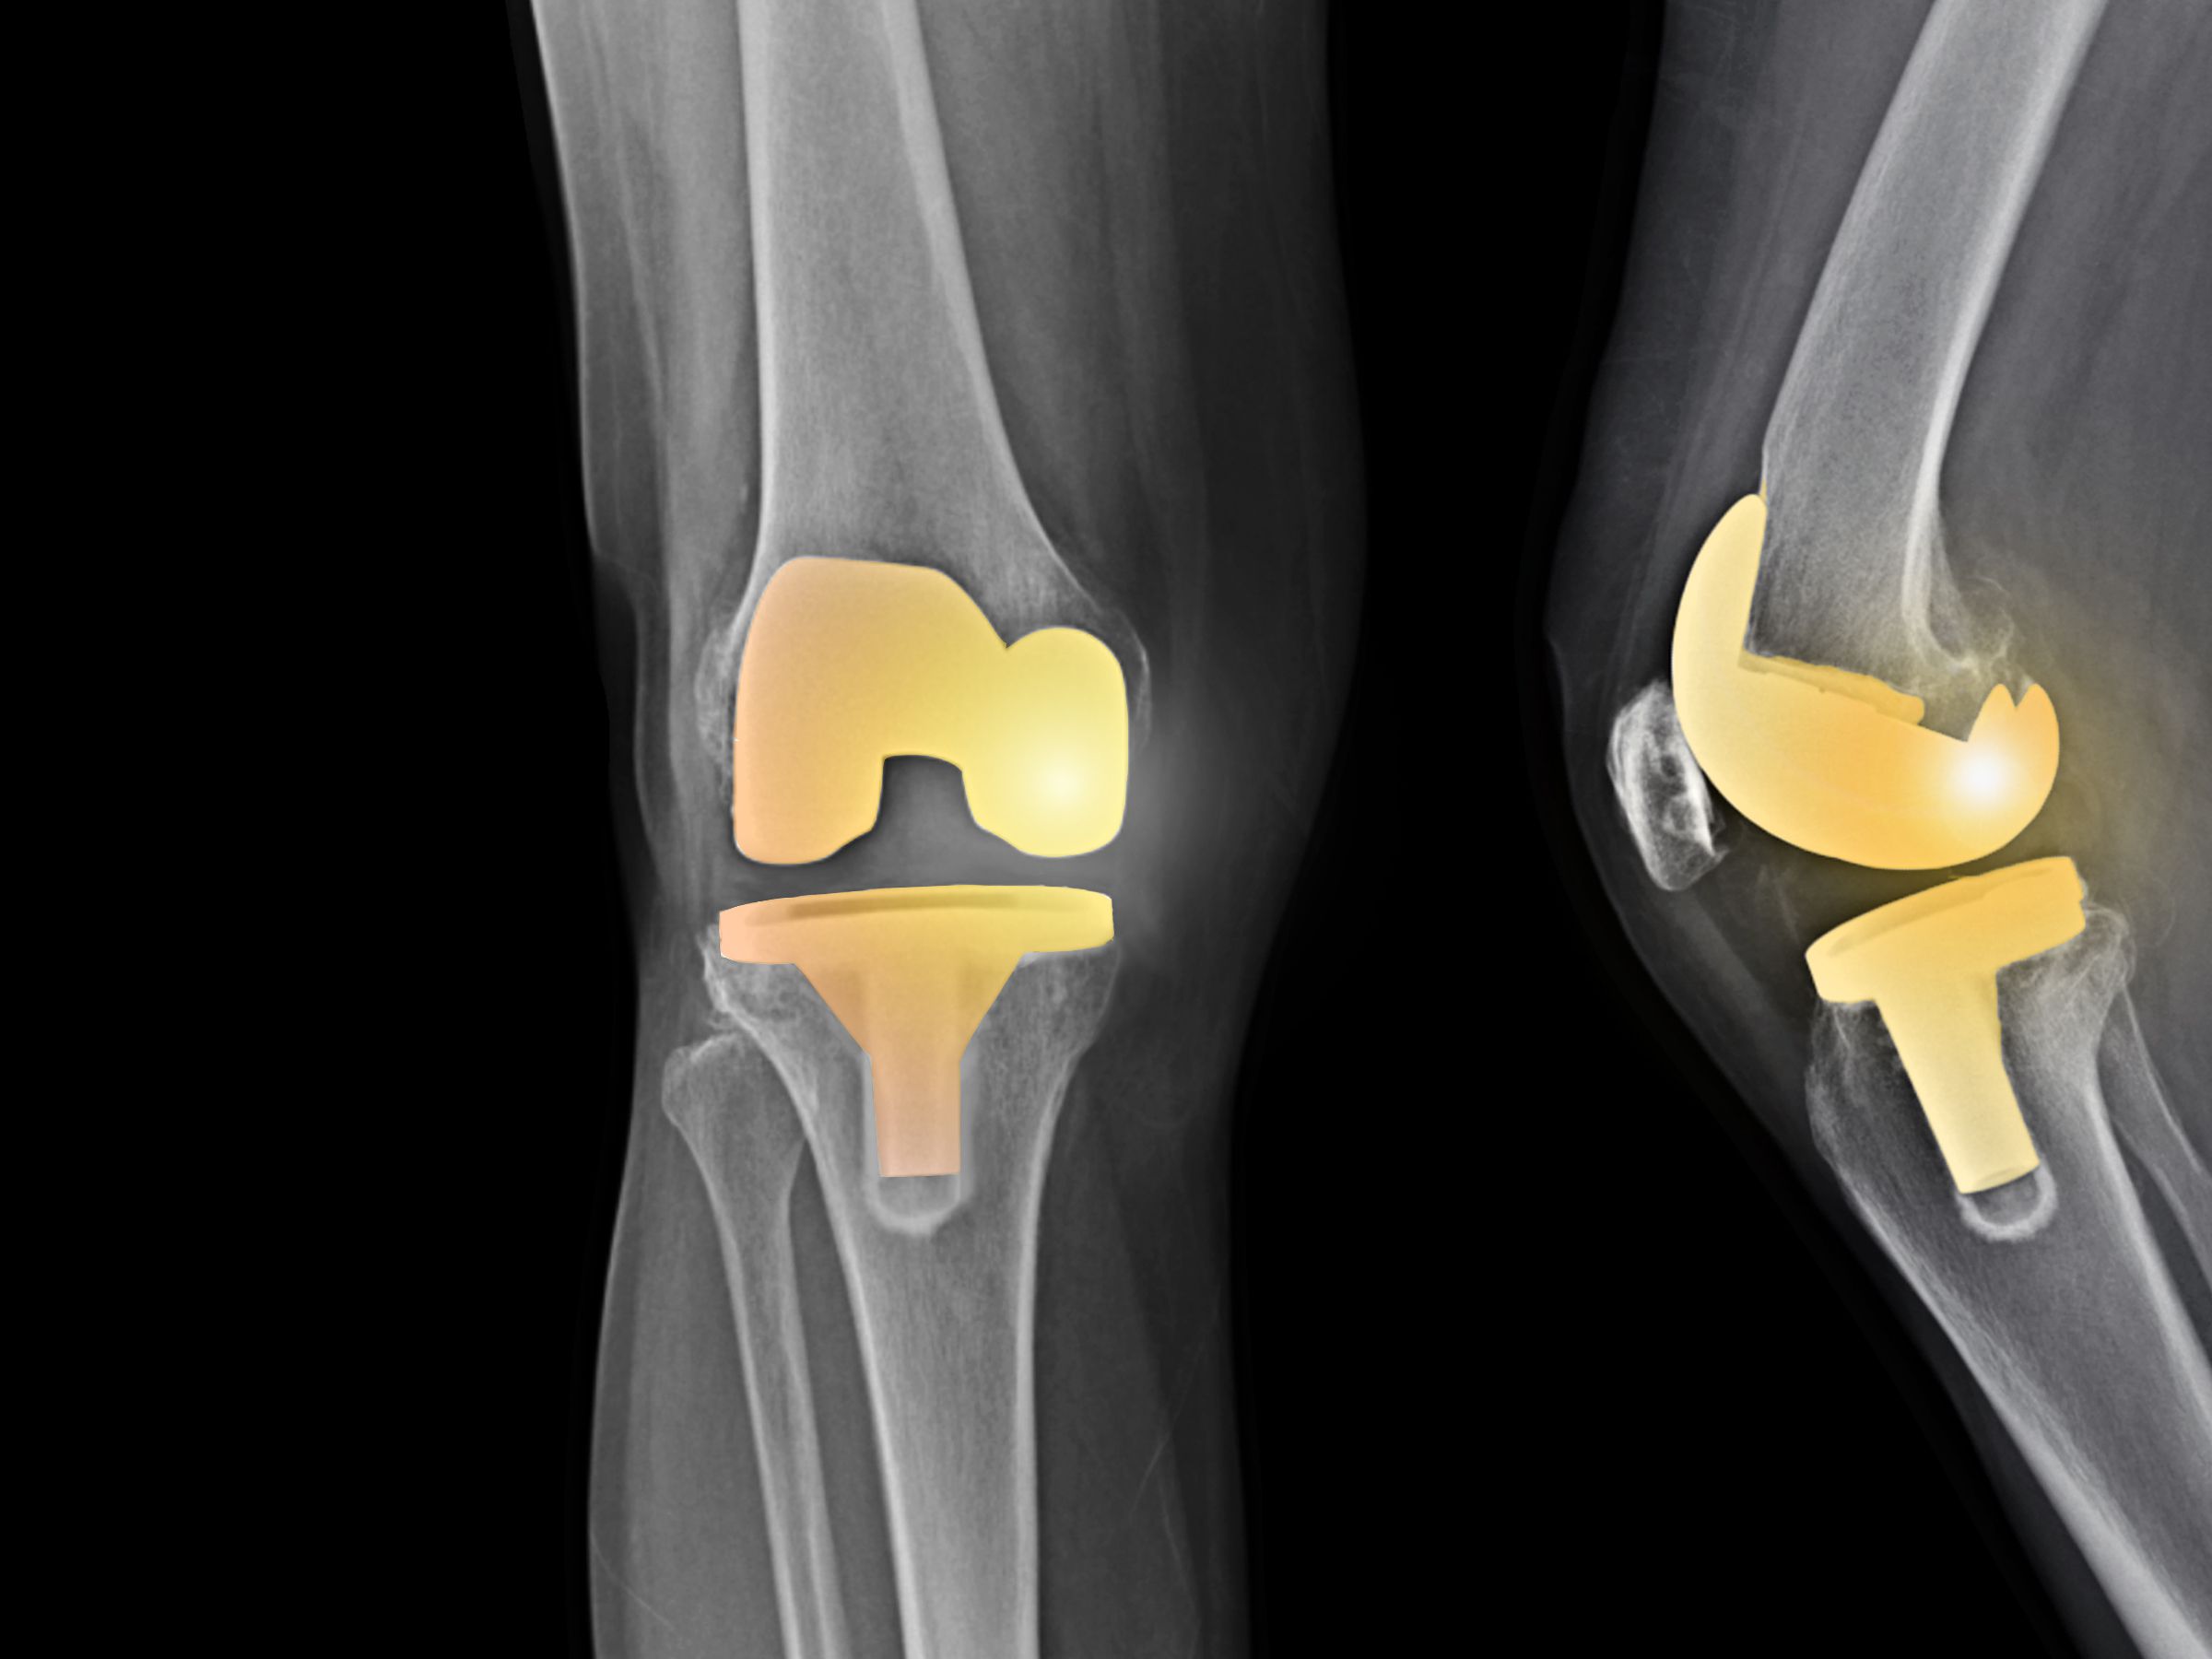 Total Knee Replacement UL, Singapore